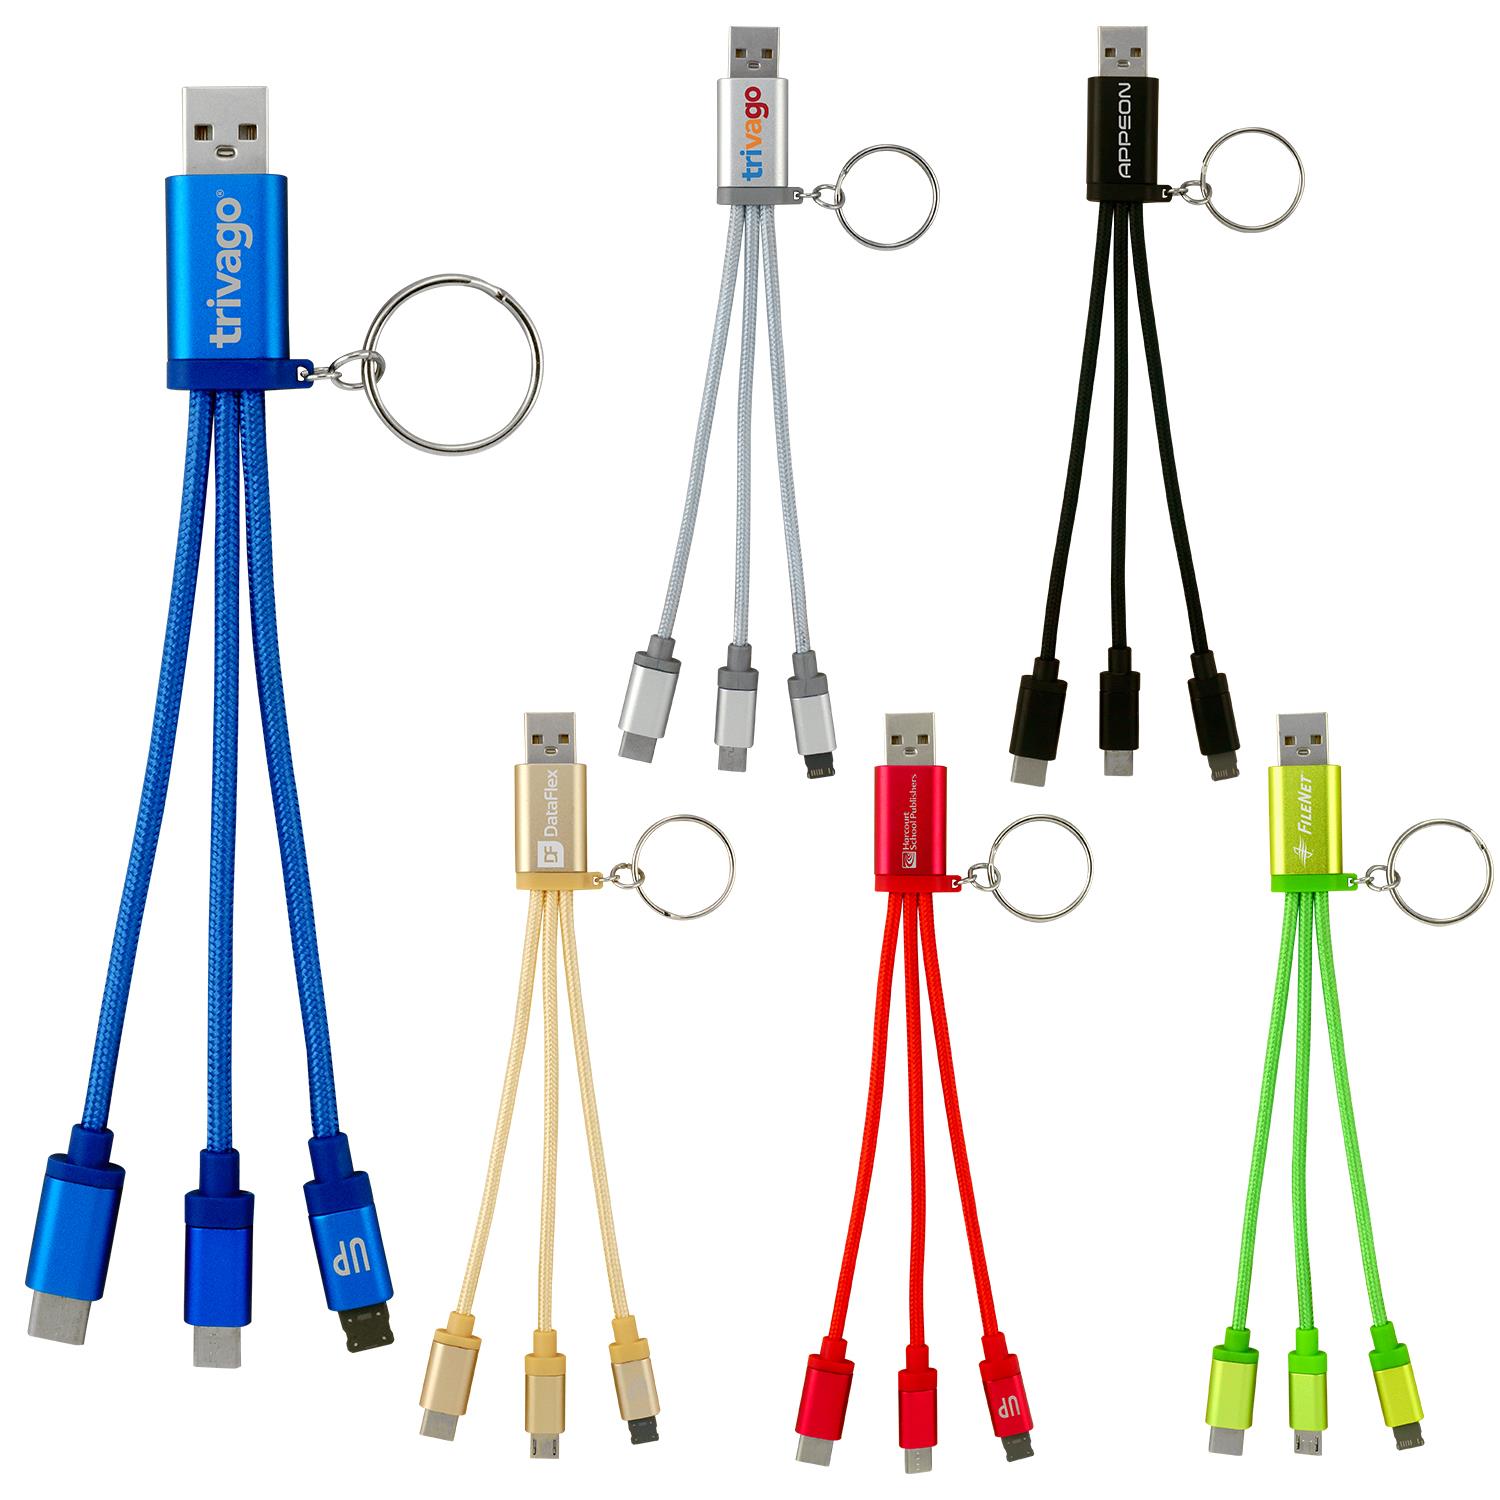 Metallic 3-in-1 Keychain Cable with Type C USB